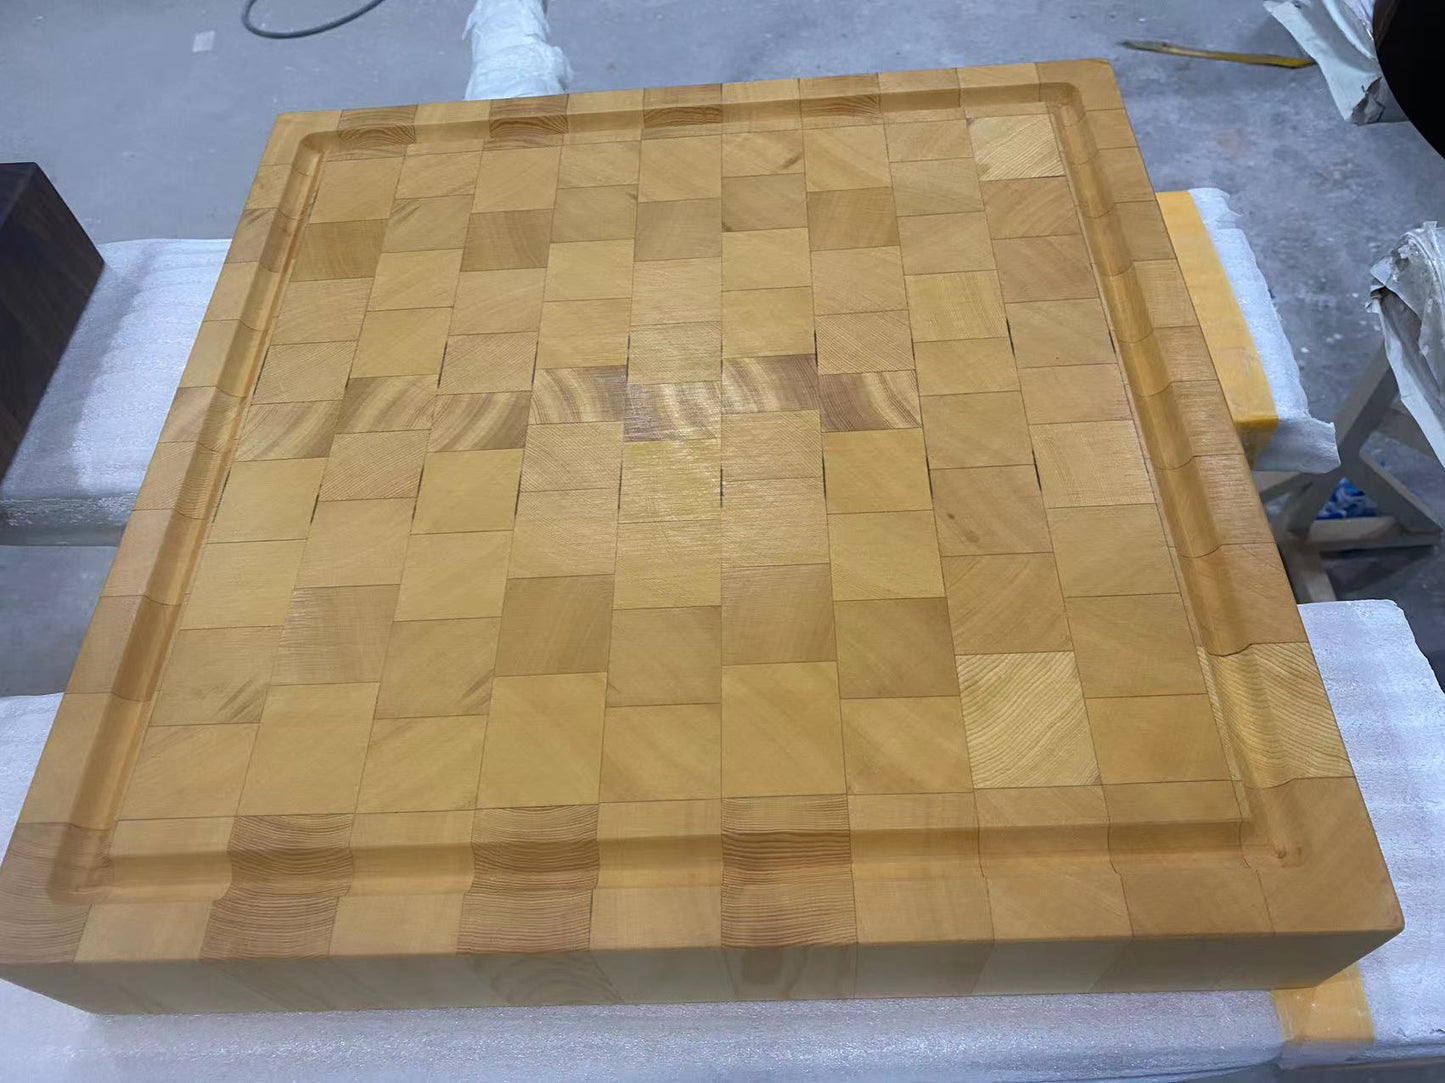 End Grain - Reversible 18"L x 18"W x 3"T Cutting/Carving/Chopping/Serving Board